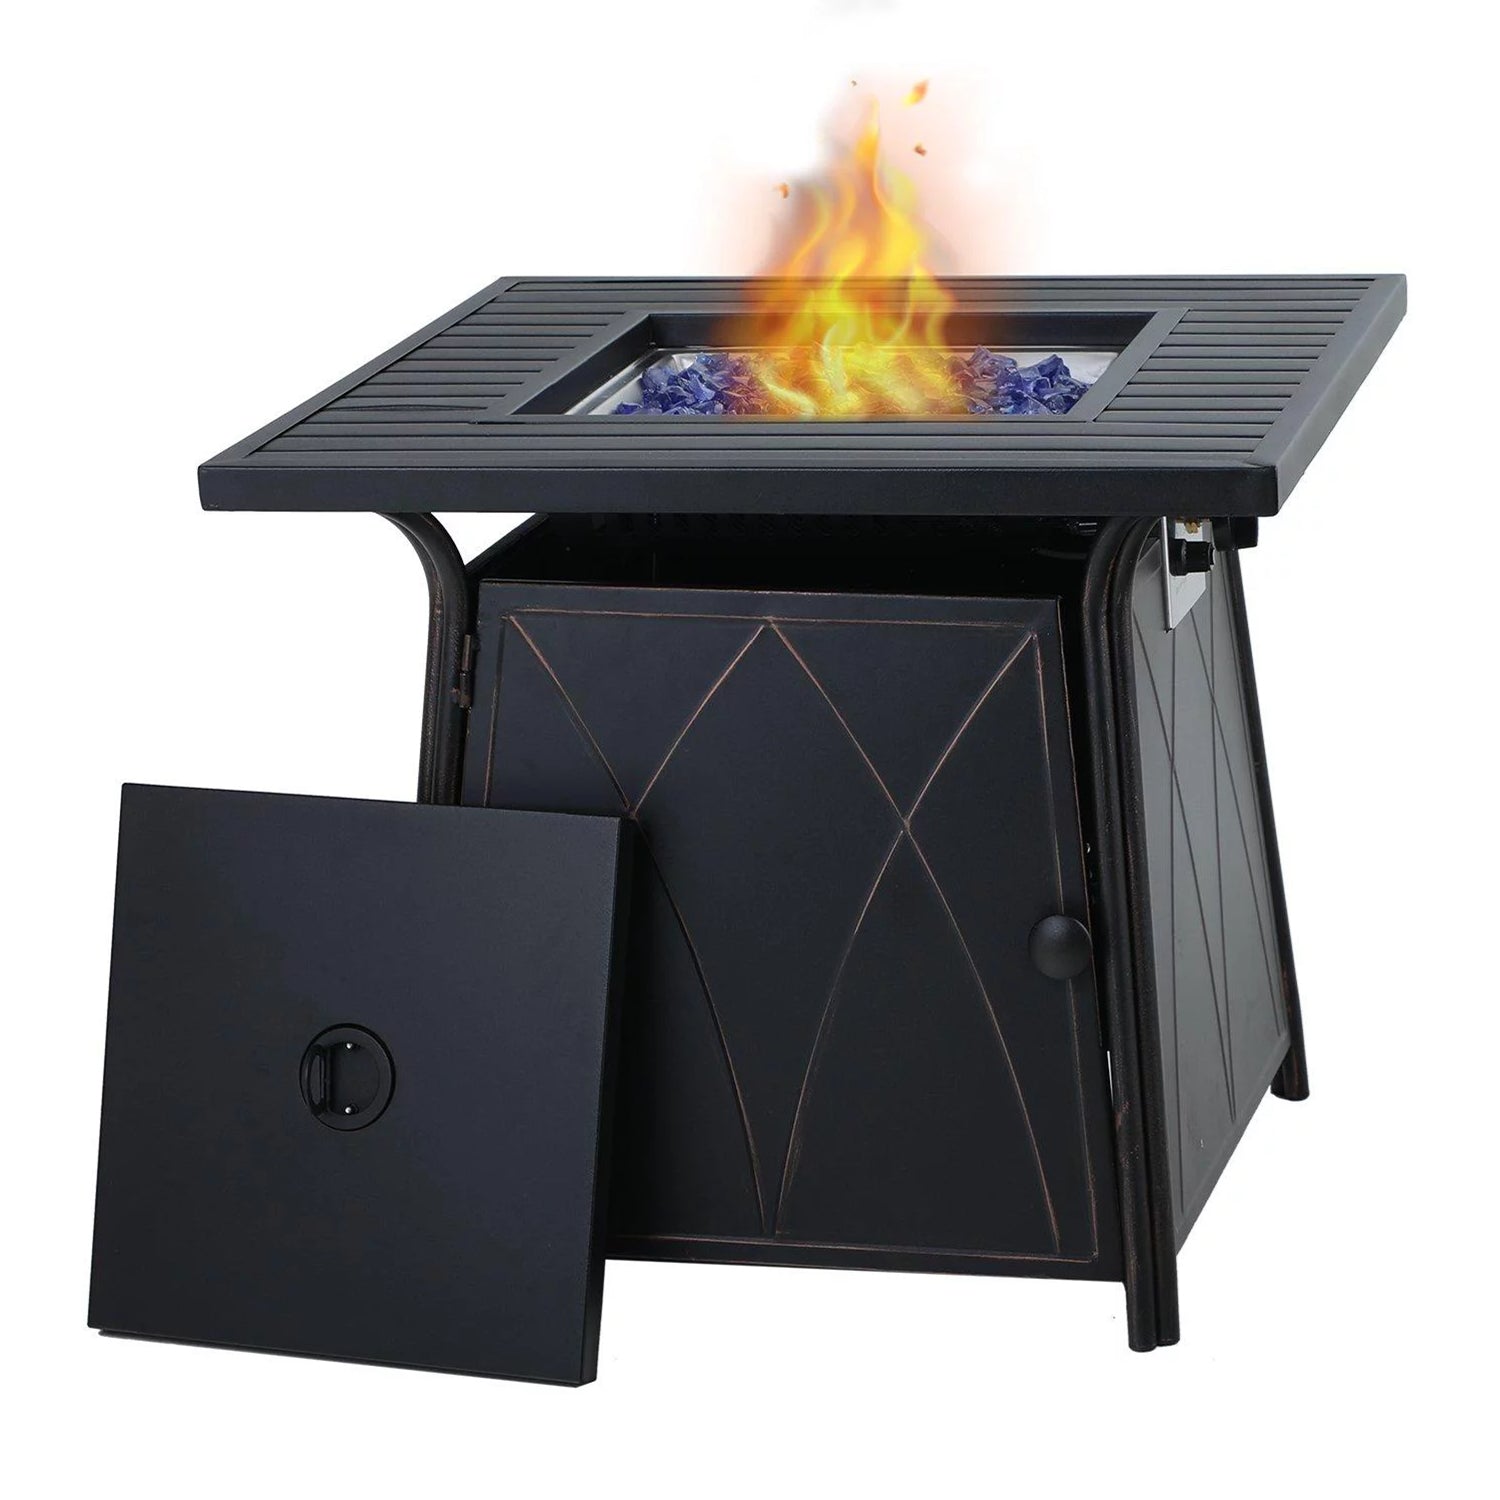 Sophia & William 28 inch Outdoor Gas Fire Pit Table with Lid 50,000 BTU - image 1 of 8